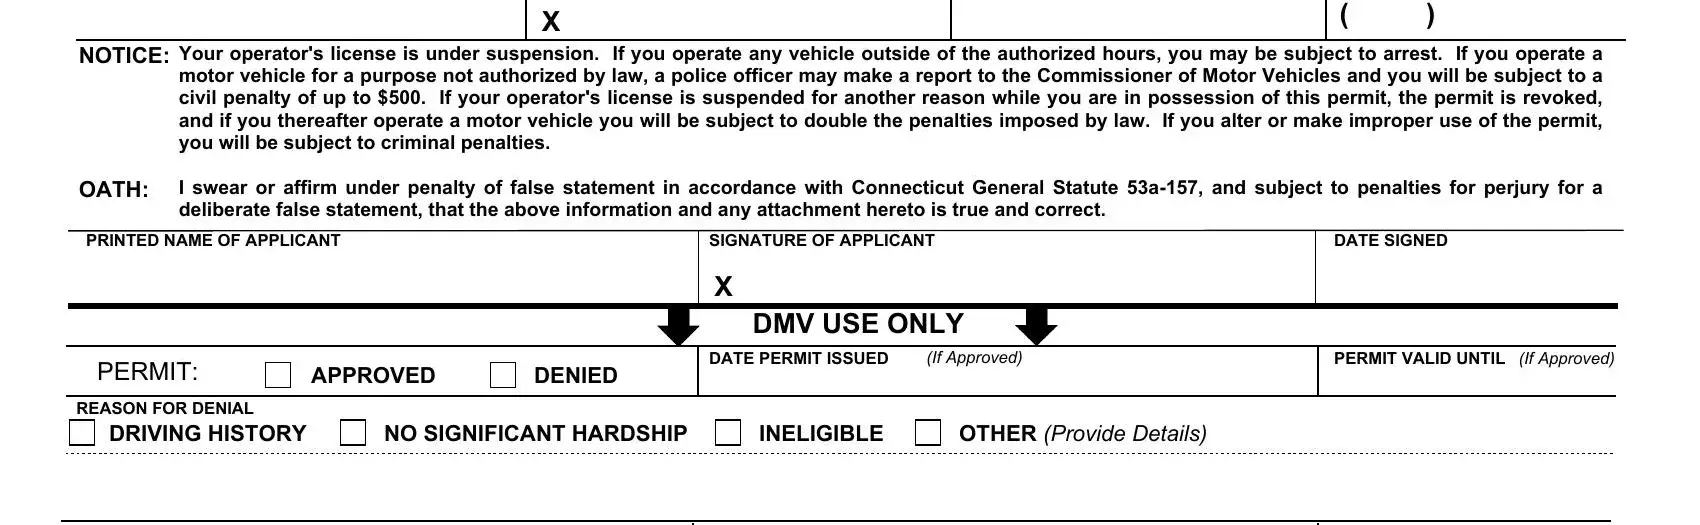 Completing application special permit step 3